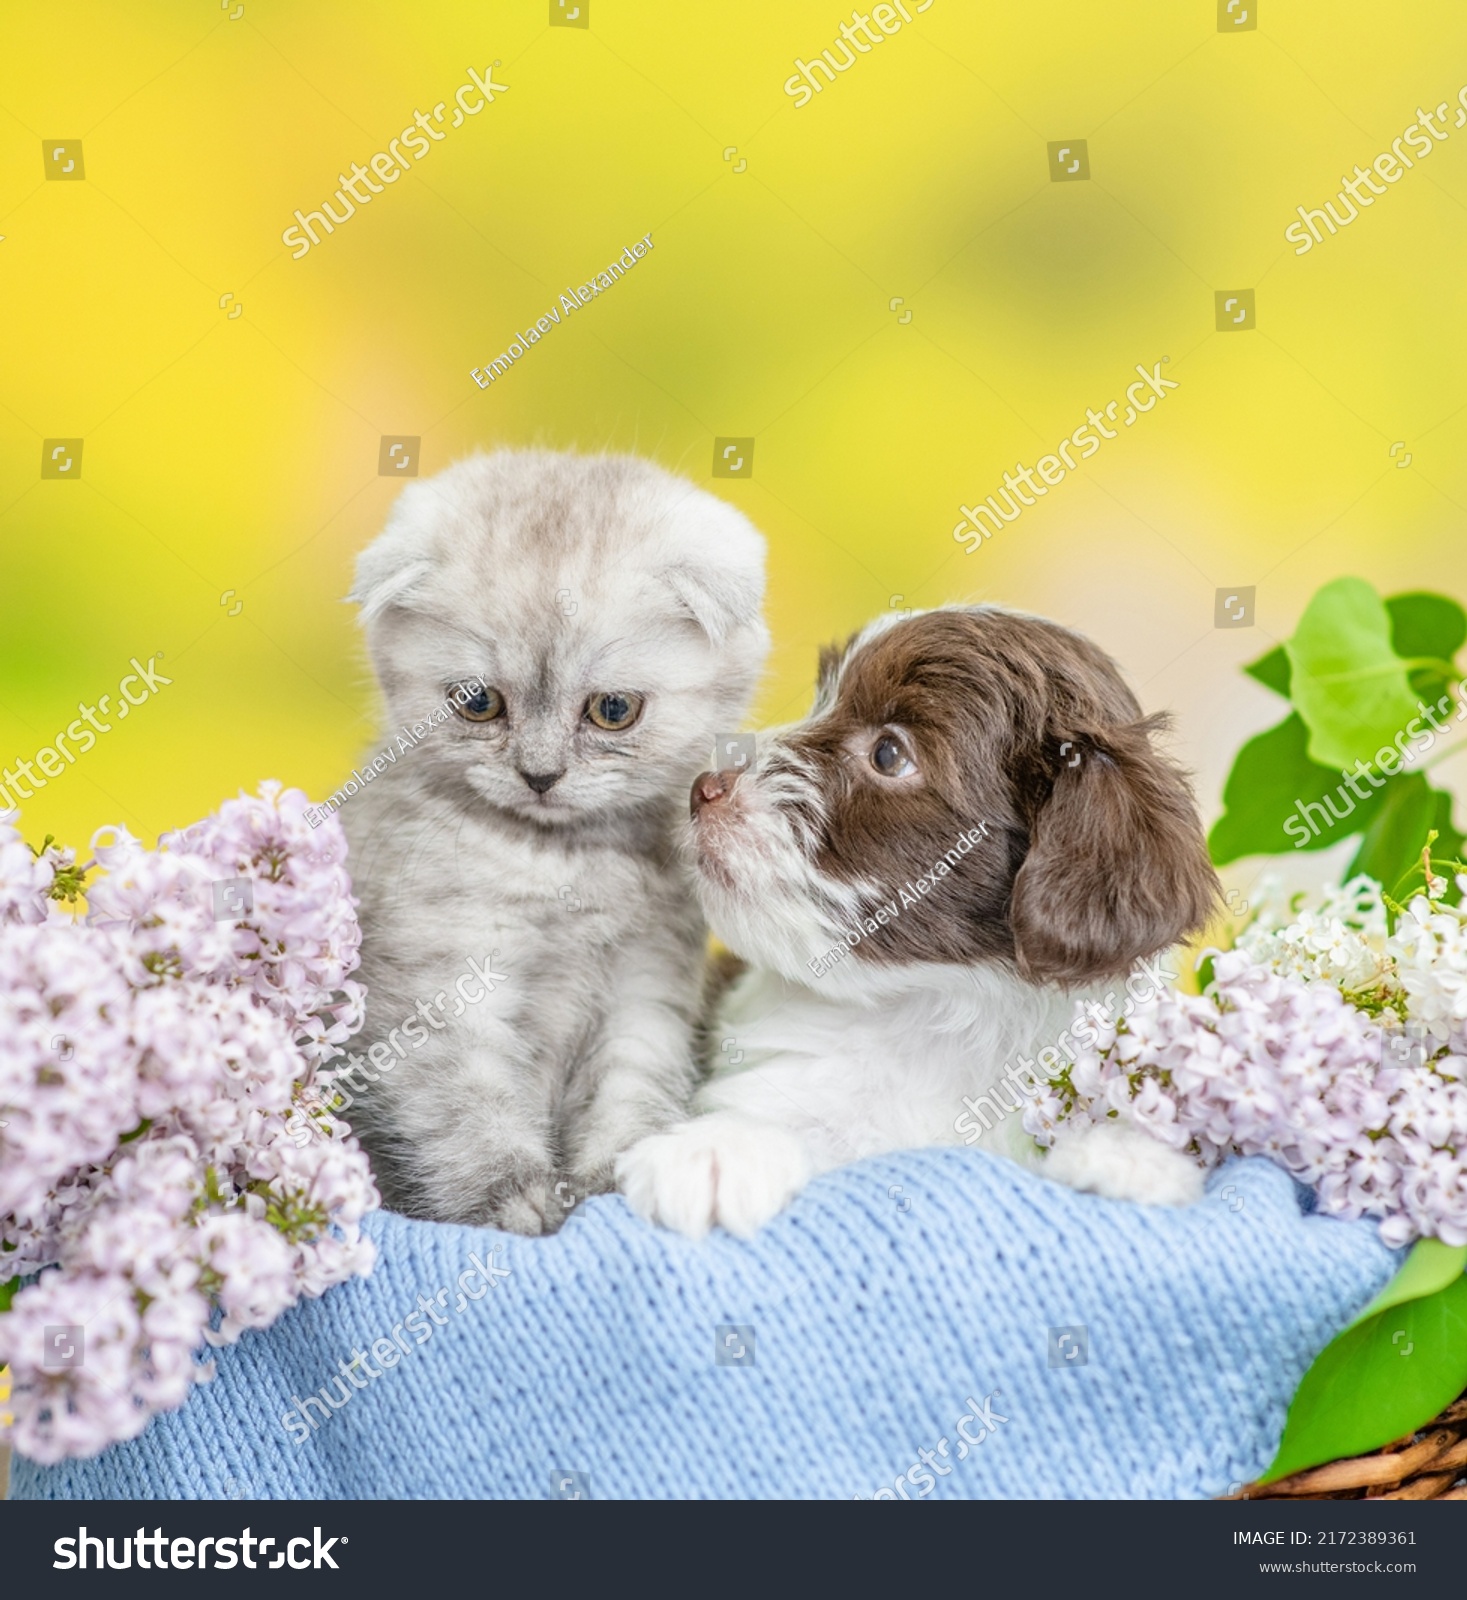 Yorkshire terrier puppy and tiny kitten sit together inside basket between lilacs flowers. #2172389361